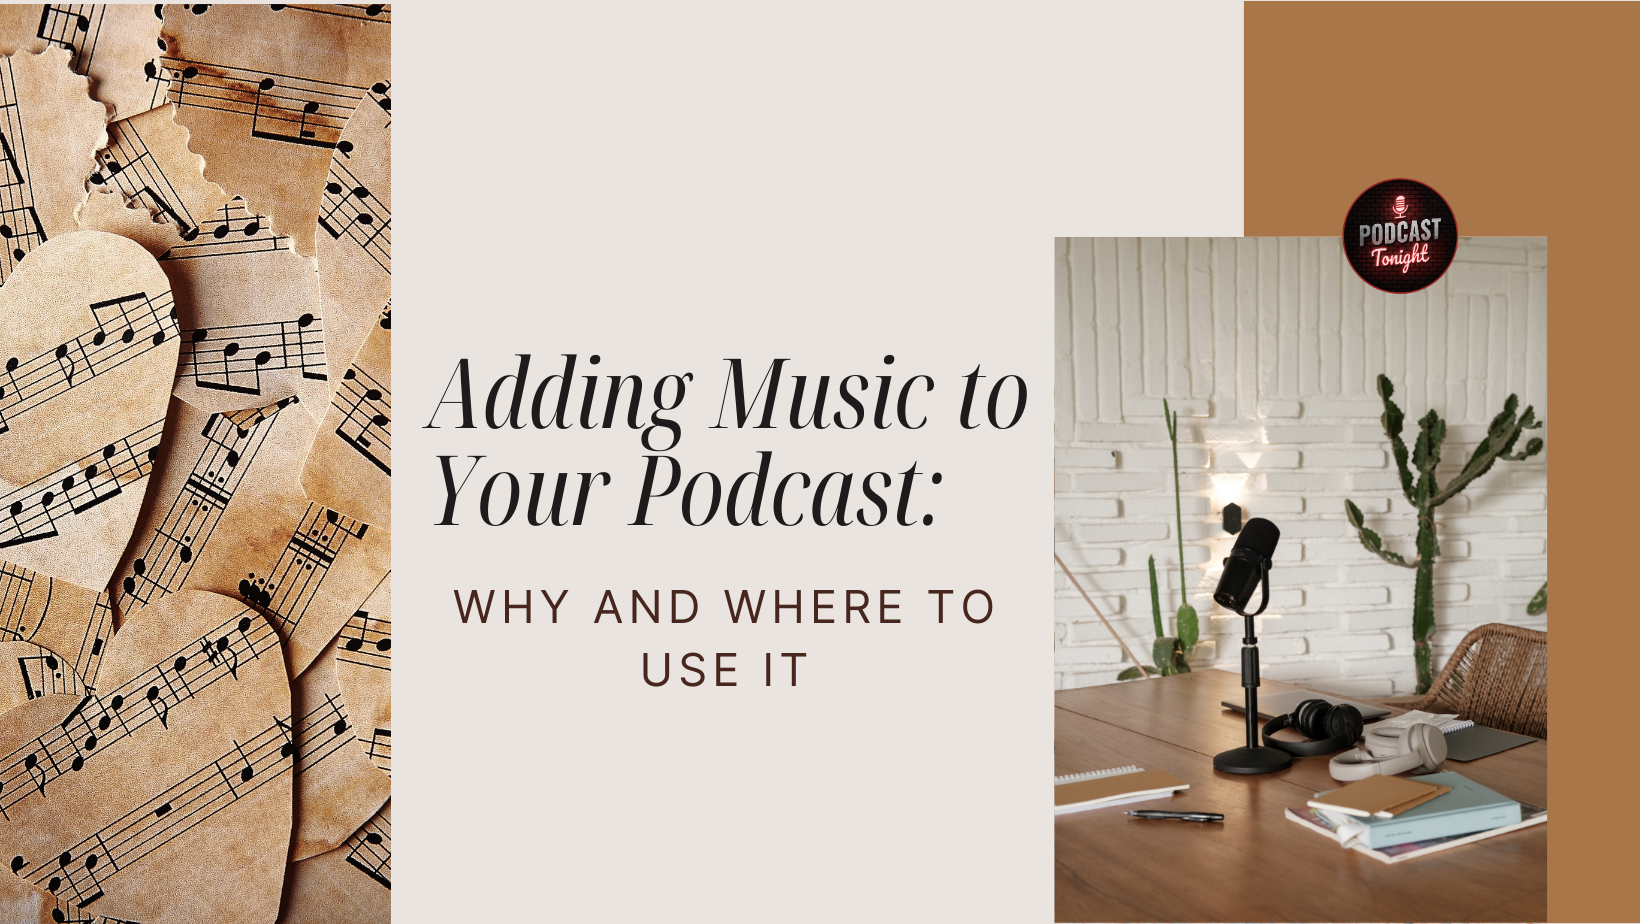 Adding Music to Your Podcast: Why and Where to Use It